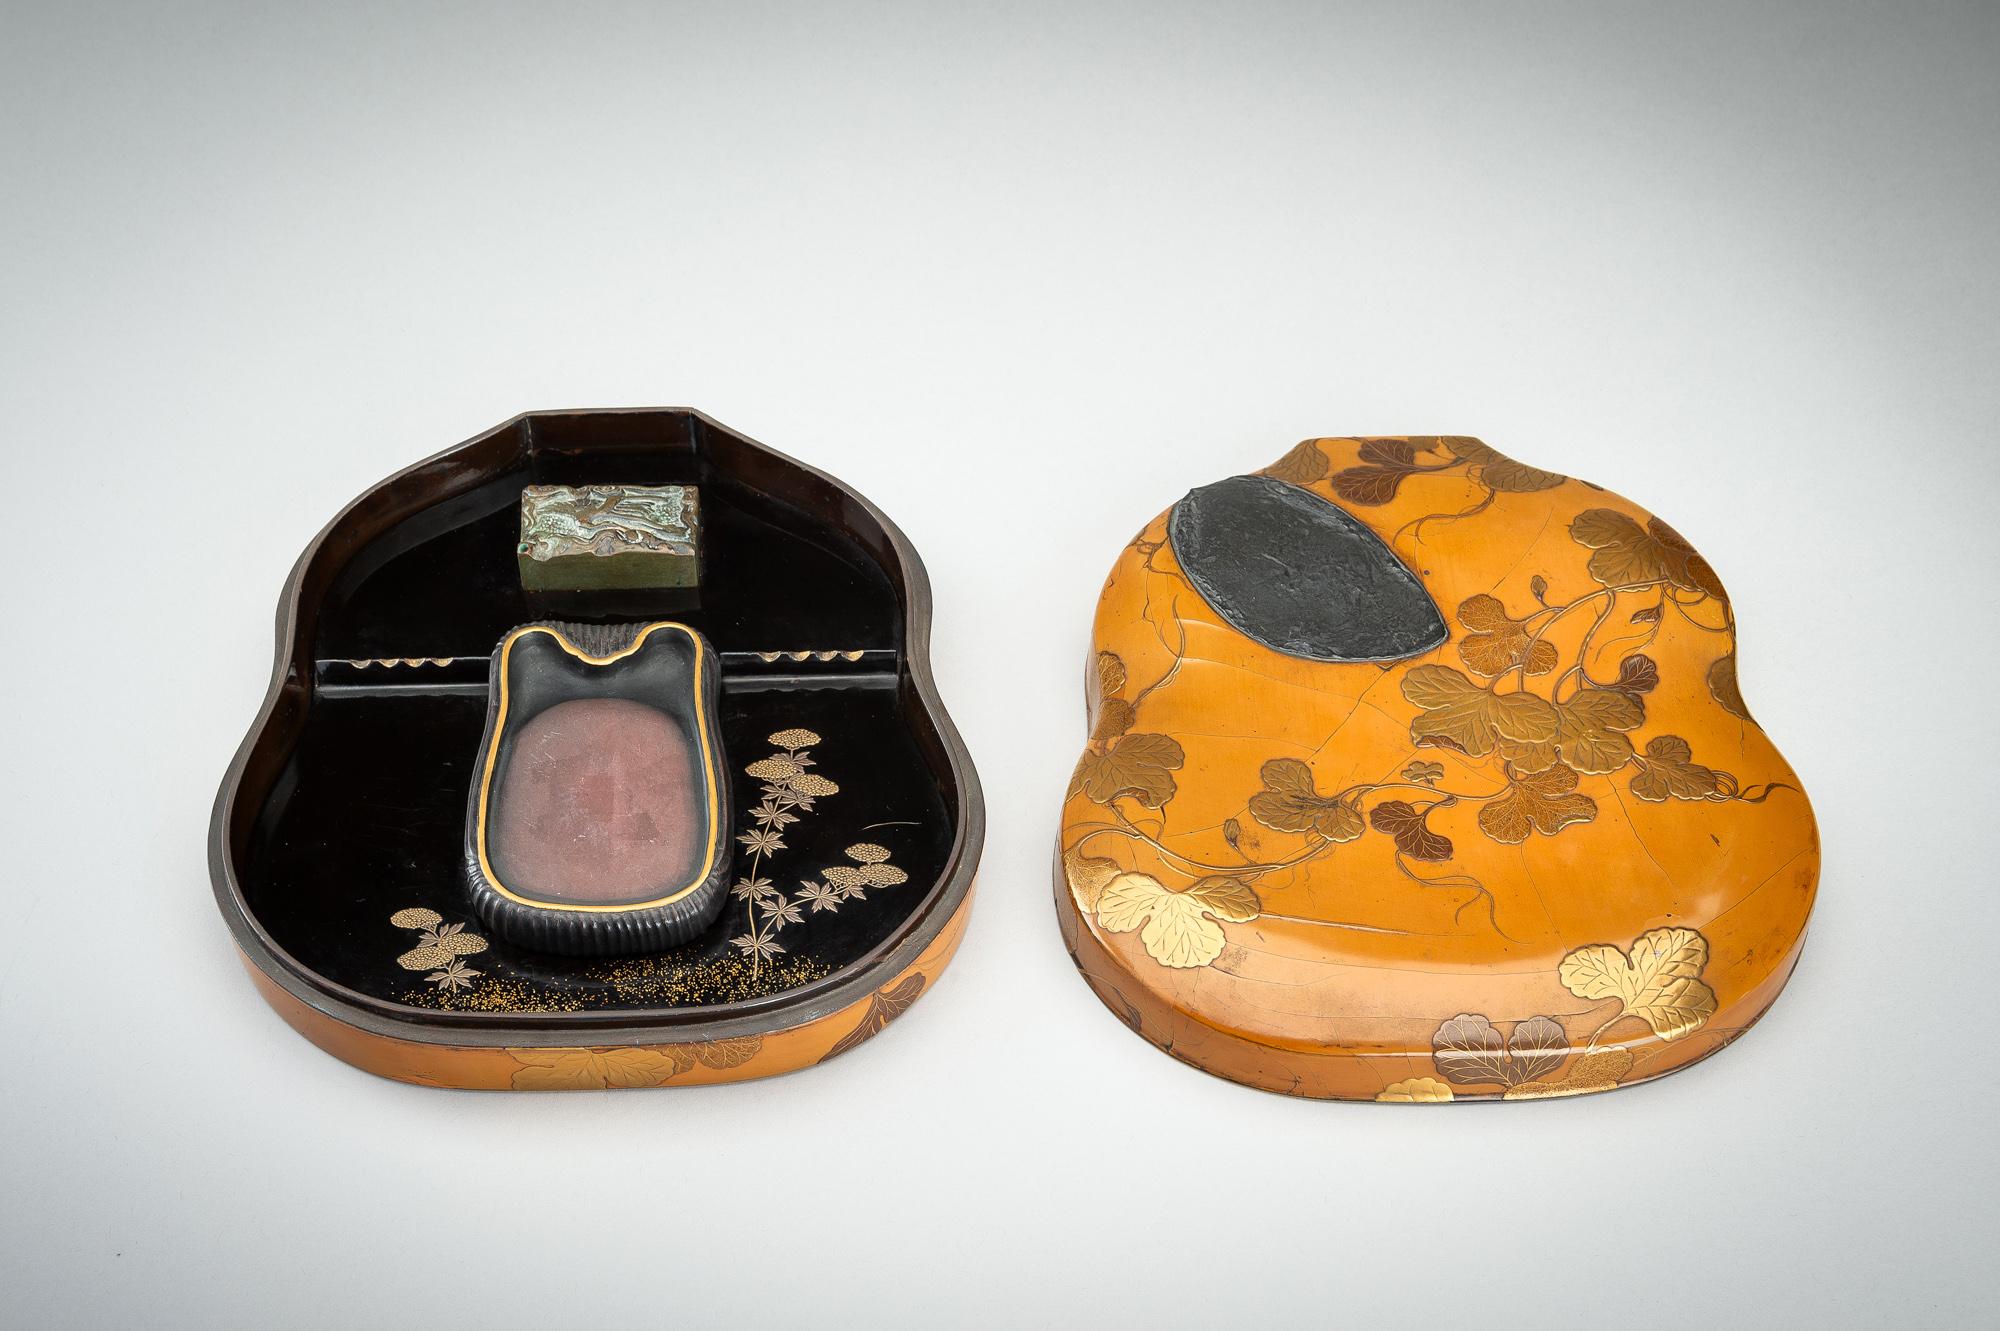 An uniquely double-gourd-shaped lacquer suzuri’bako (writing box) with a design of gourd leaves, by Hara Yôyûsai (1769-1845).
Covered with amber coloured lacquer and decorated in gold, orange and brown takamaki-e 高蒔絵 with gourd leaves and a waning